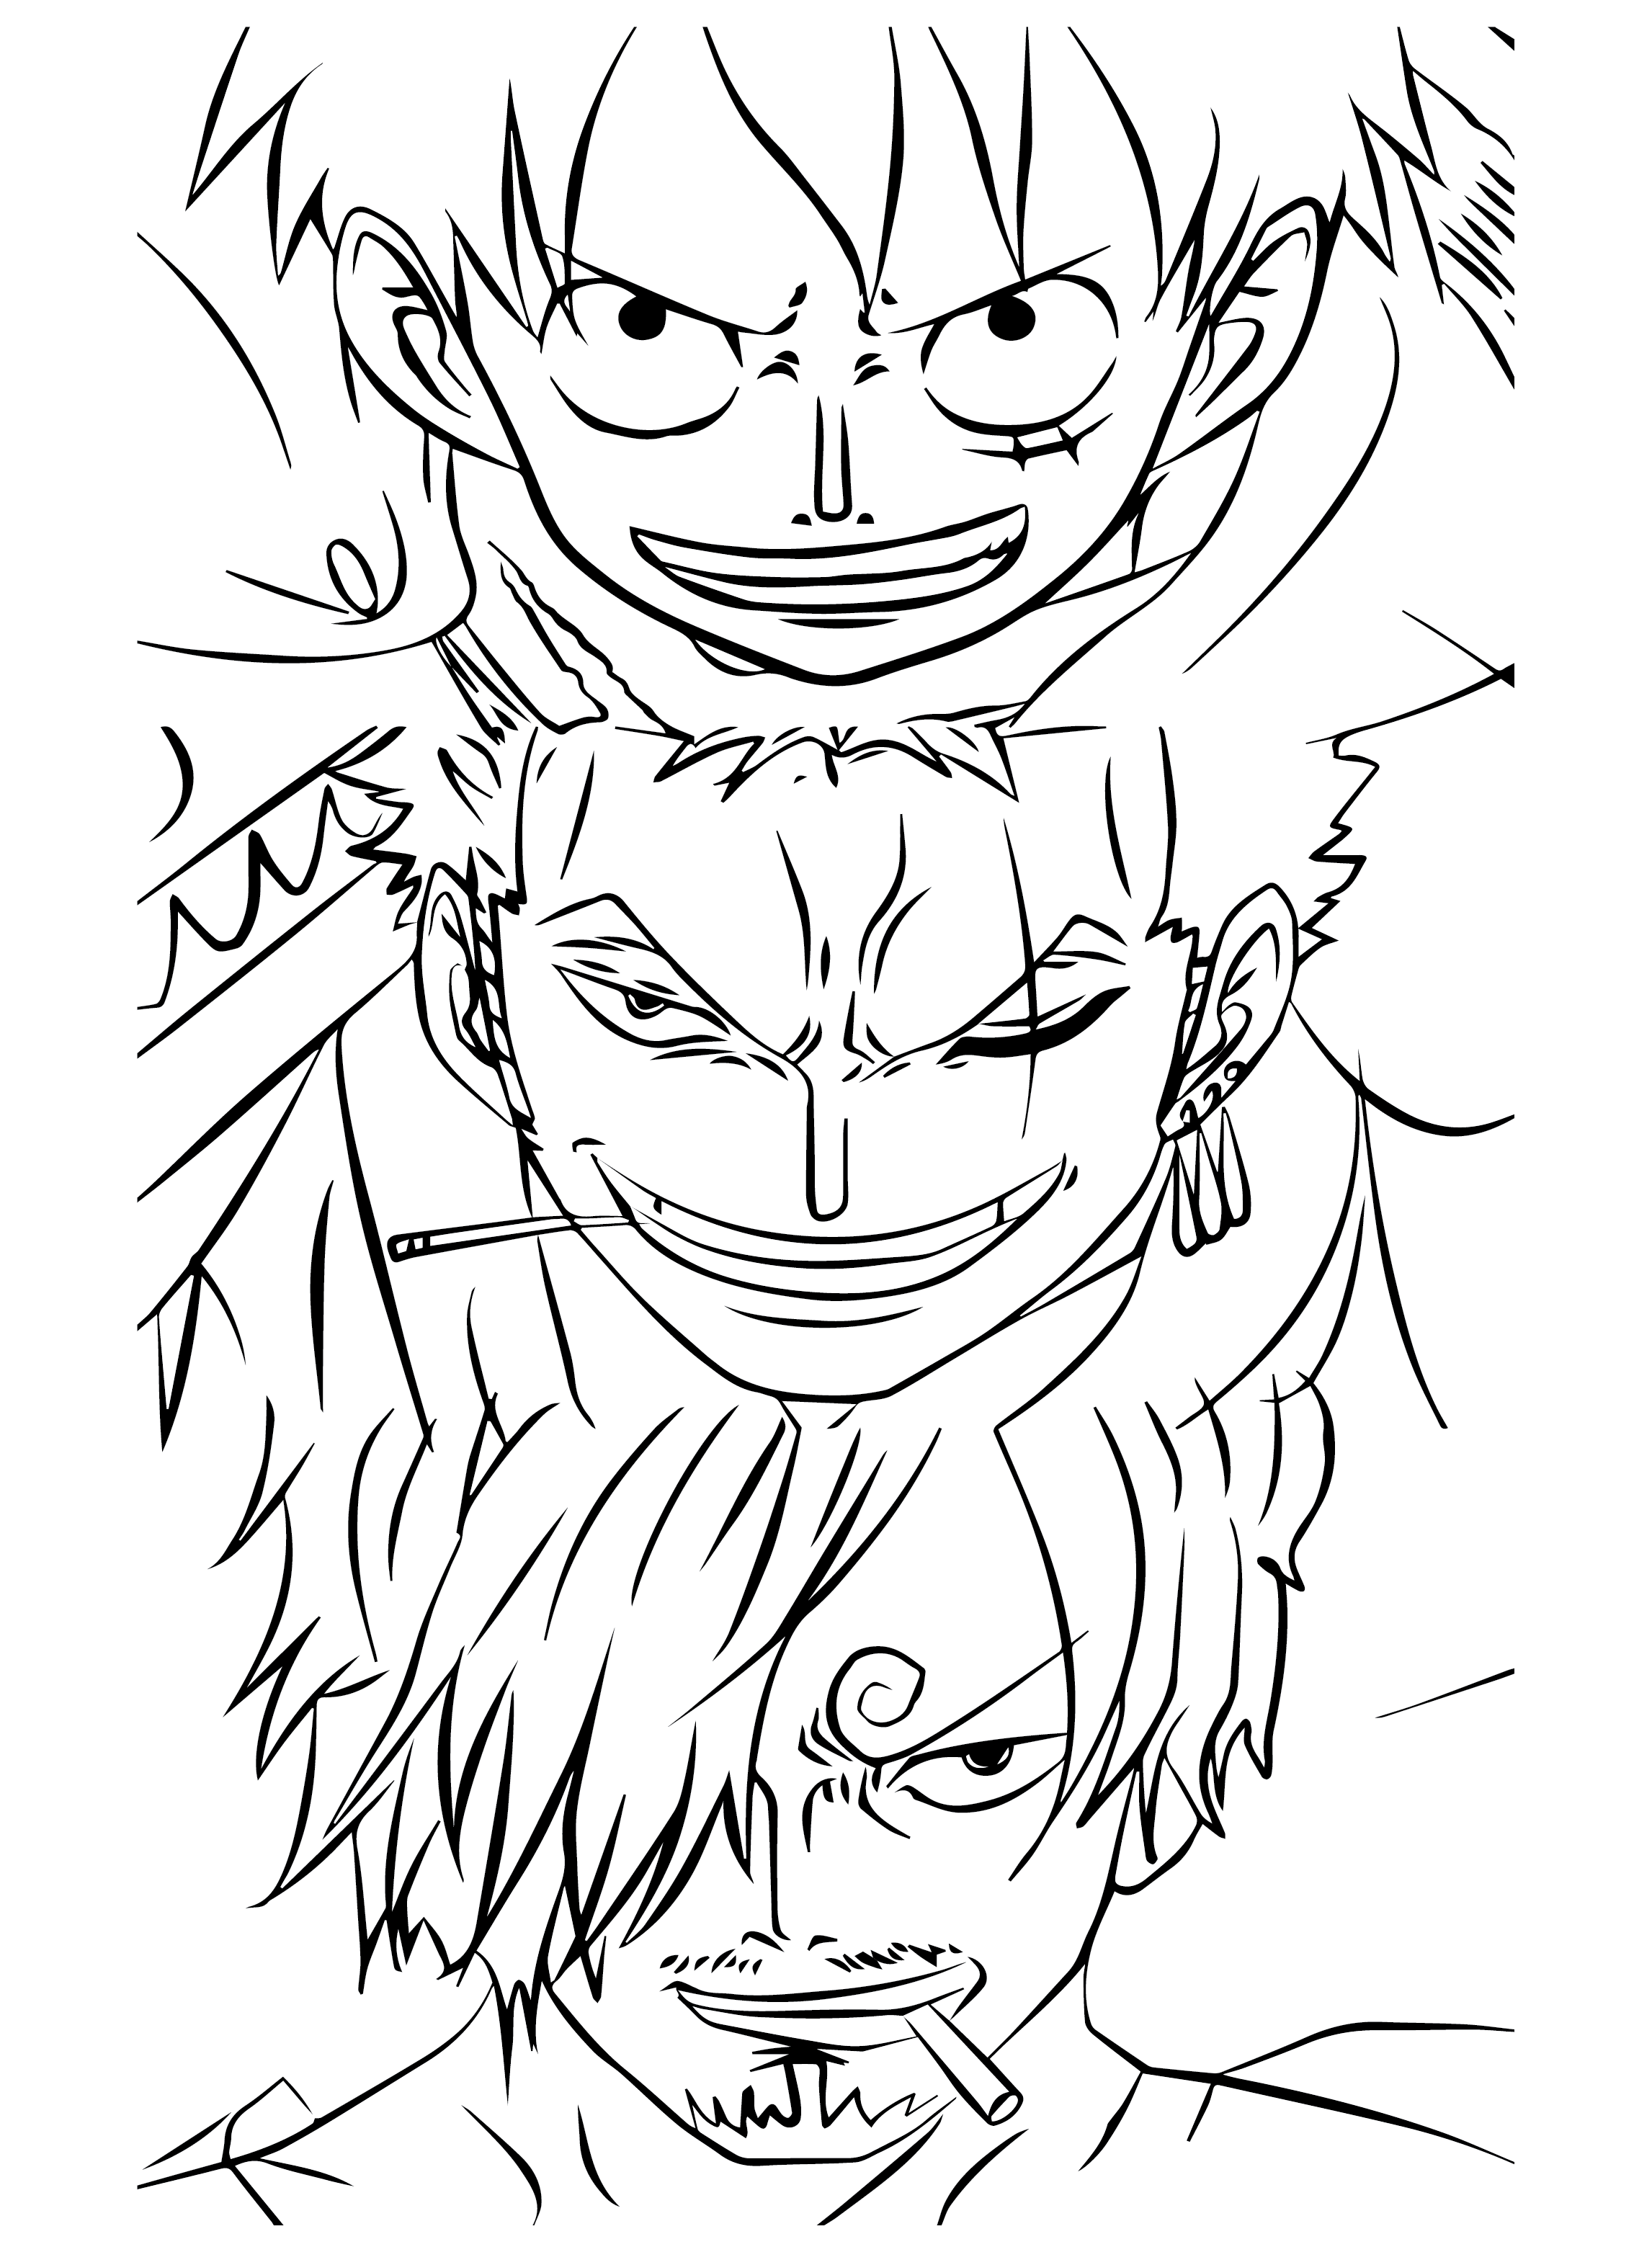 Luffy, Zoro, Sanji Coloring Page to Print from Luffy